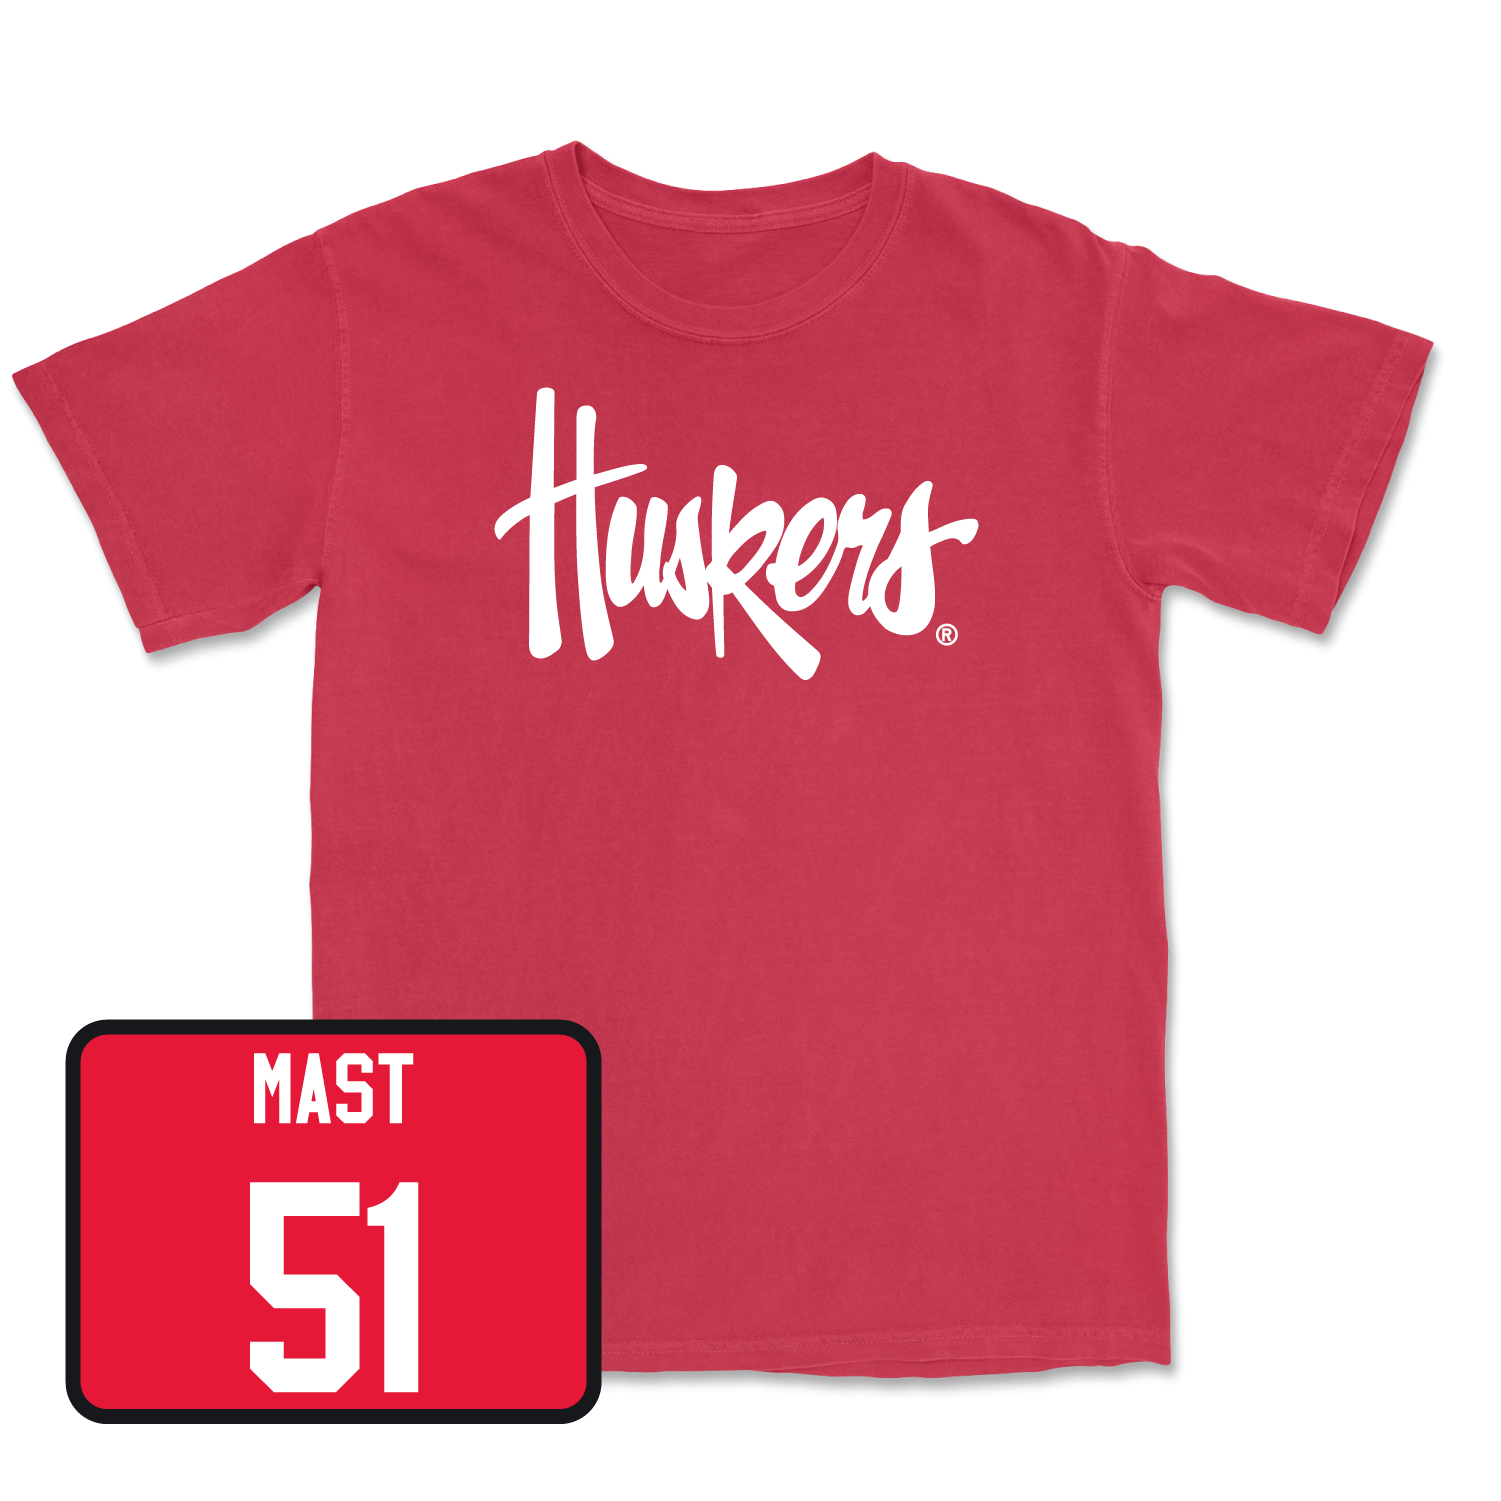 Red Men's Basketball Huskers Tee Youth Medium / Rienk Mast | #51